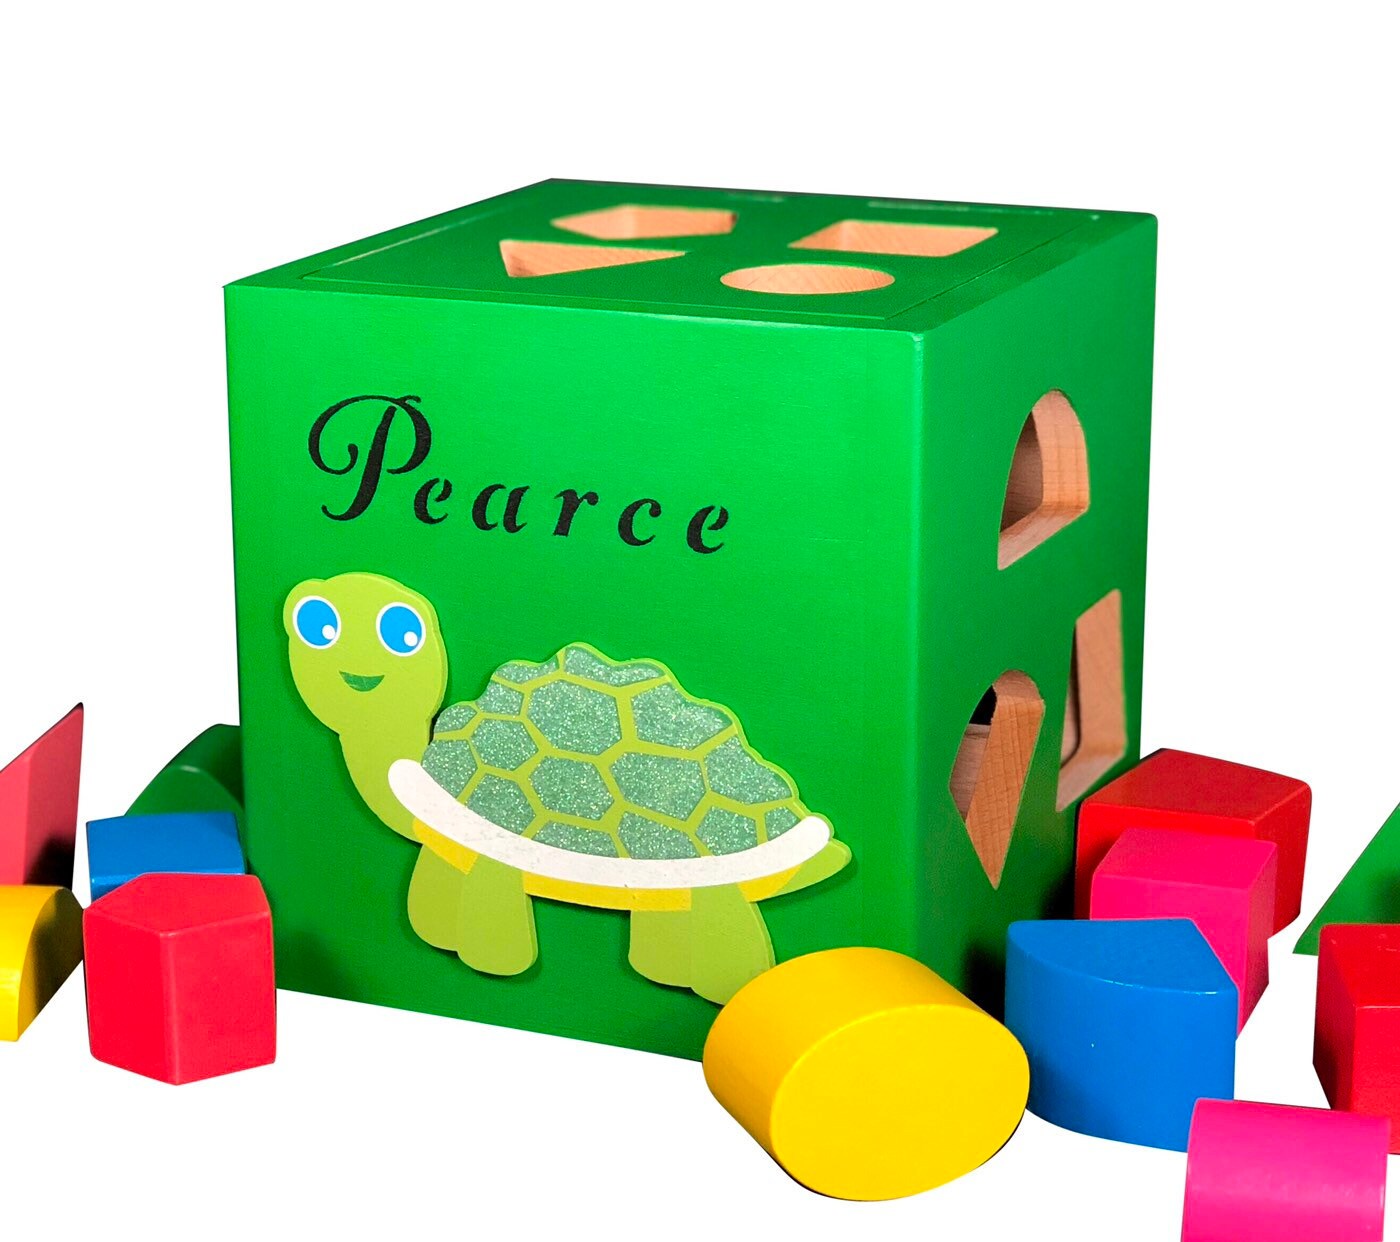 Turtle toy wooden eco friendly baby toys green shape sorter personalized new baby gift 1st birthday git 2nd birthday git baby boy gift wood